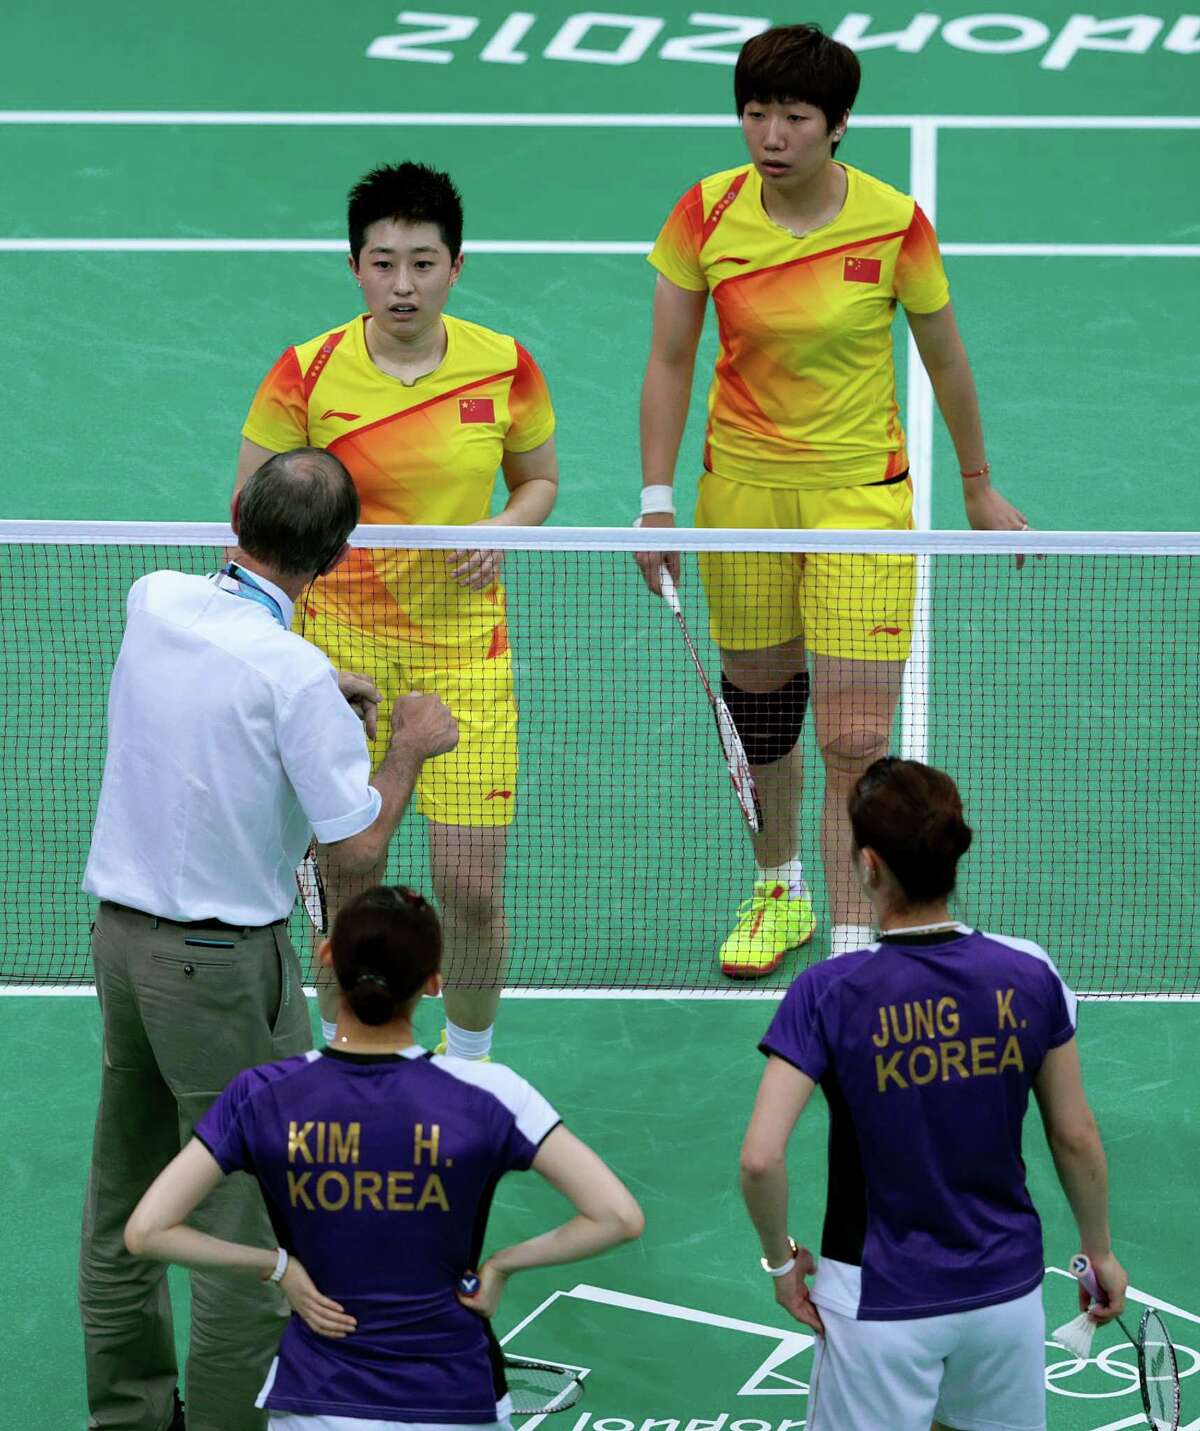 8 badminton players tossed from Olympic doubles